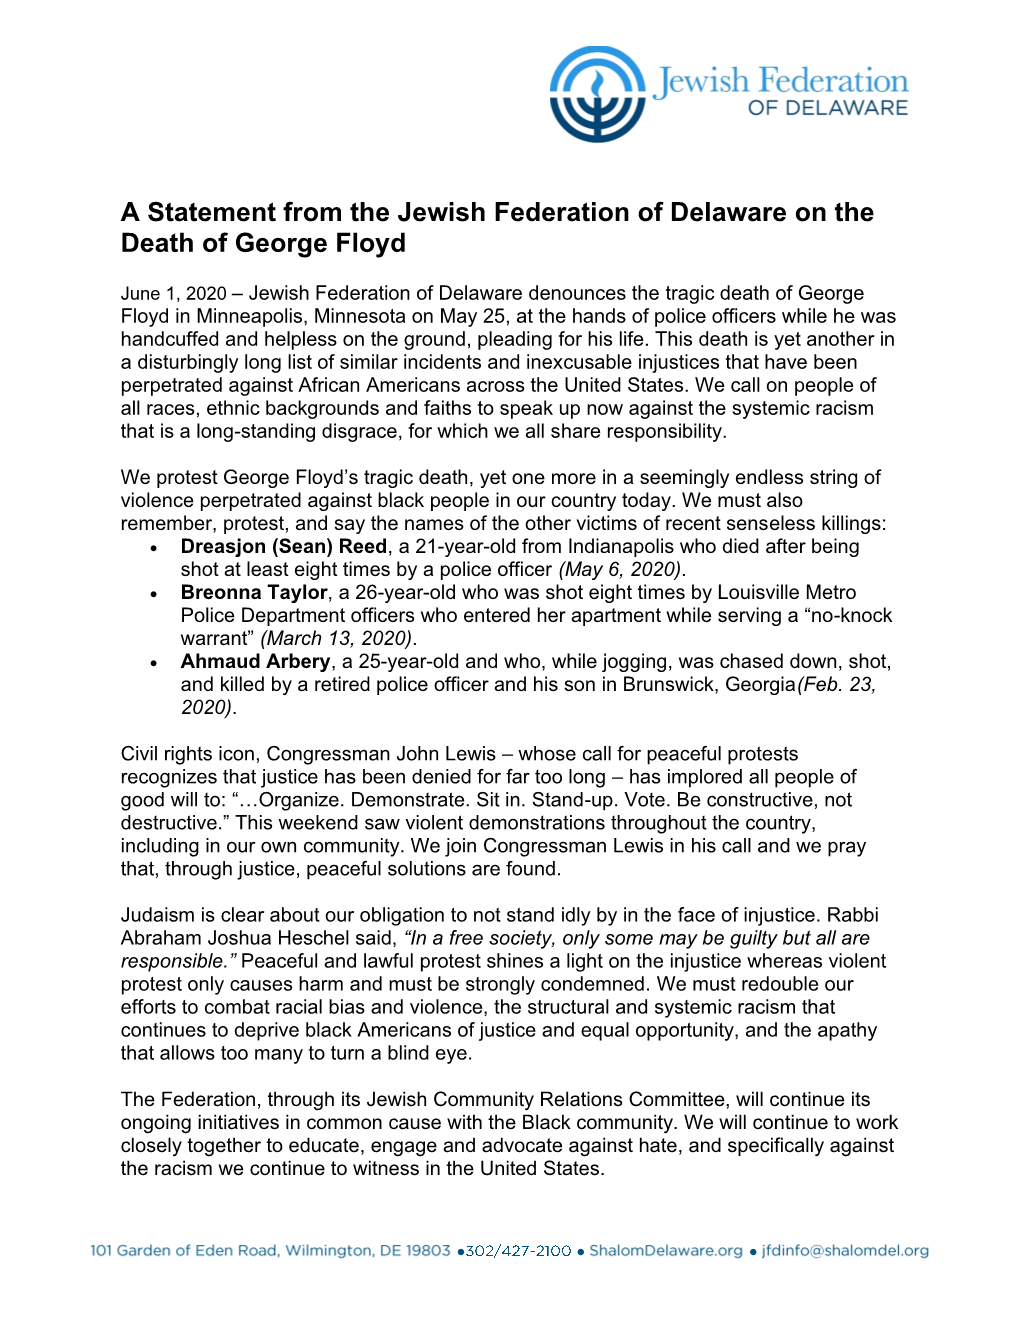 A Statement from the Jewish Federation of Delaware on the Death of George Floyd